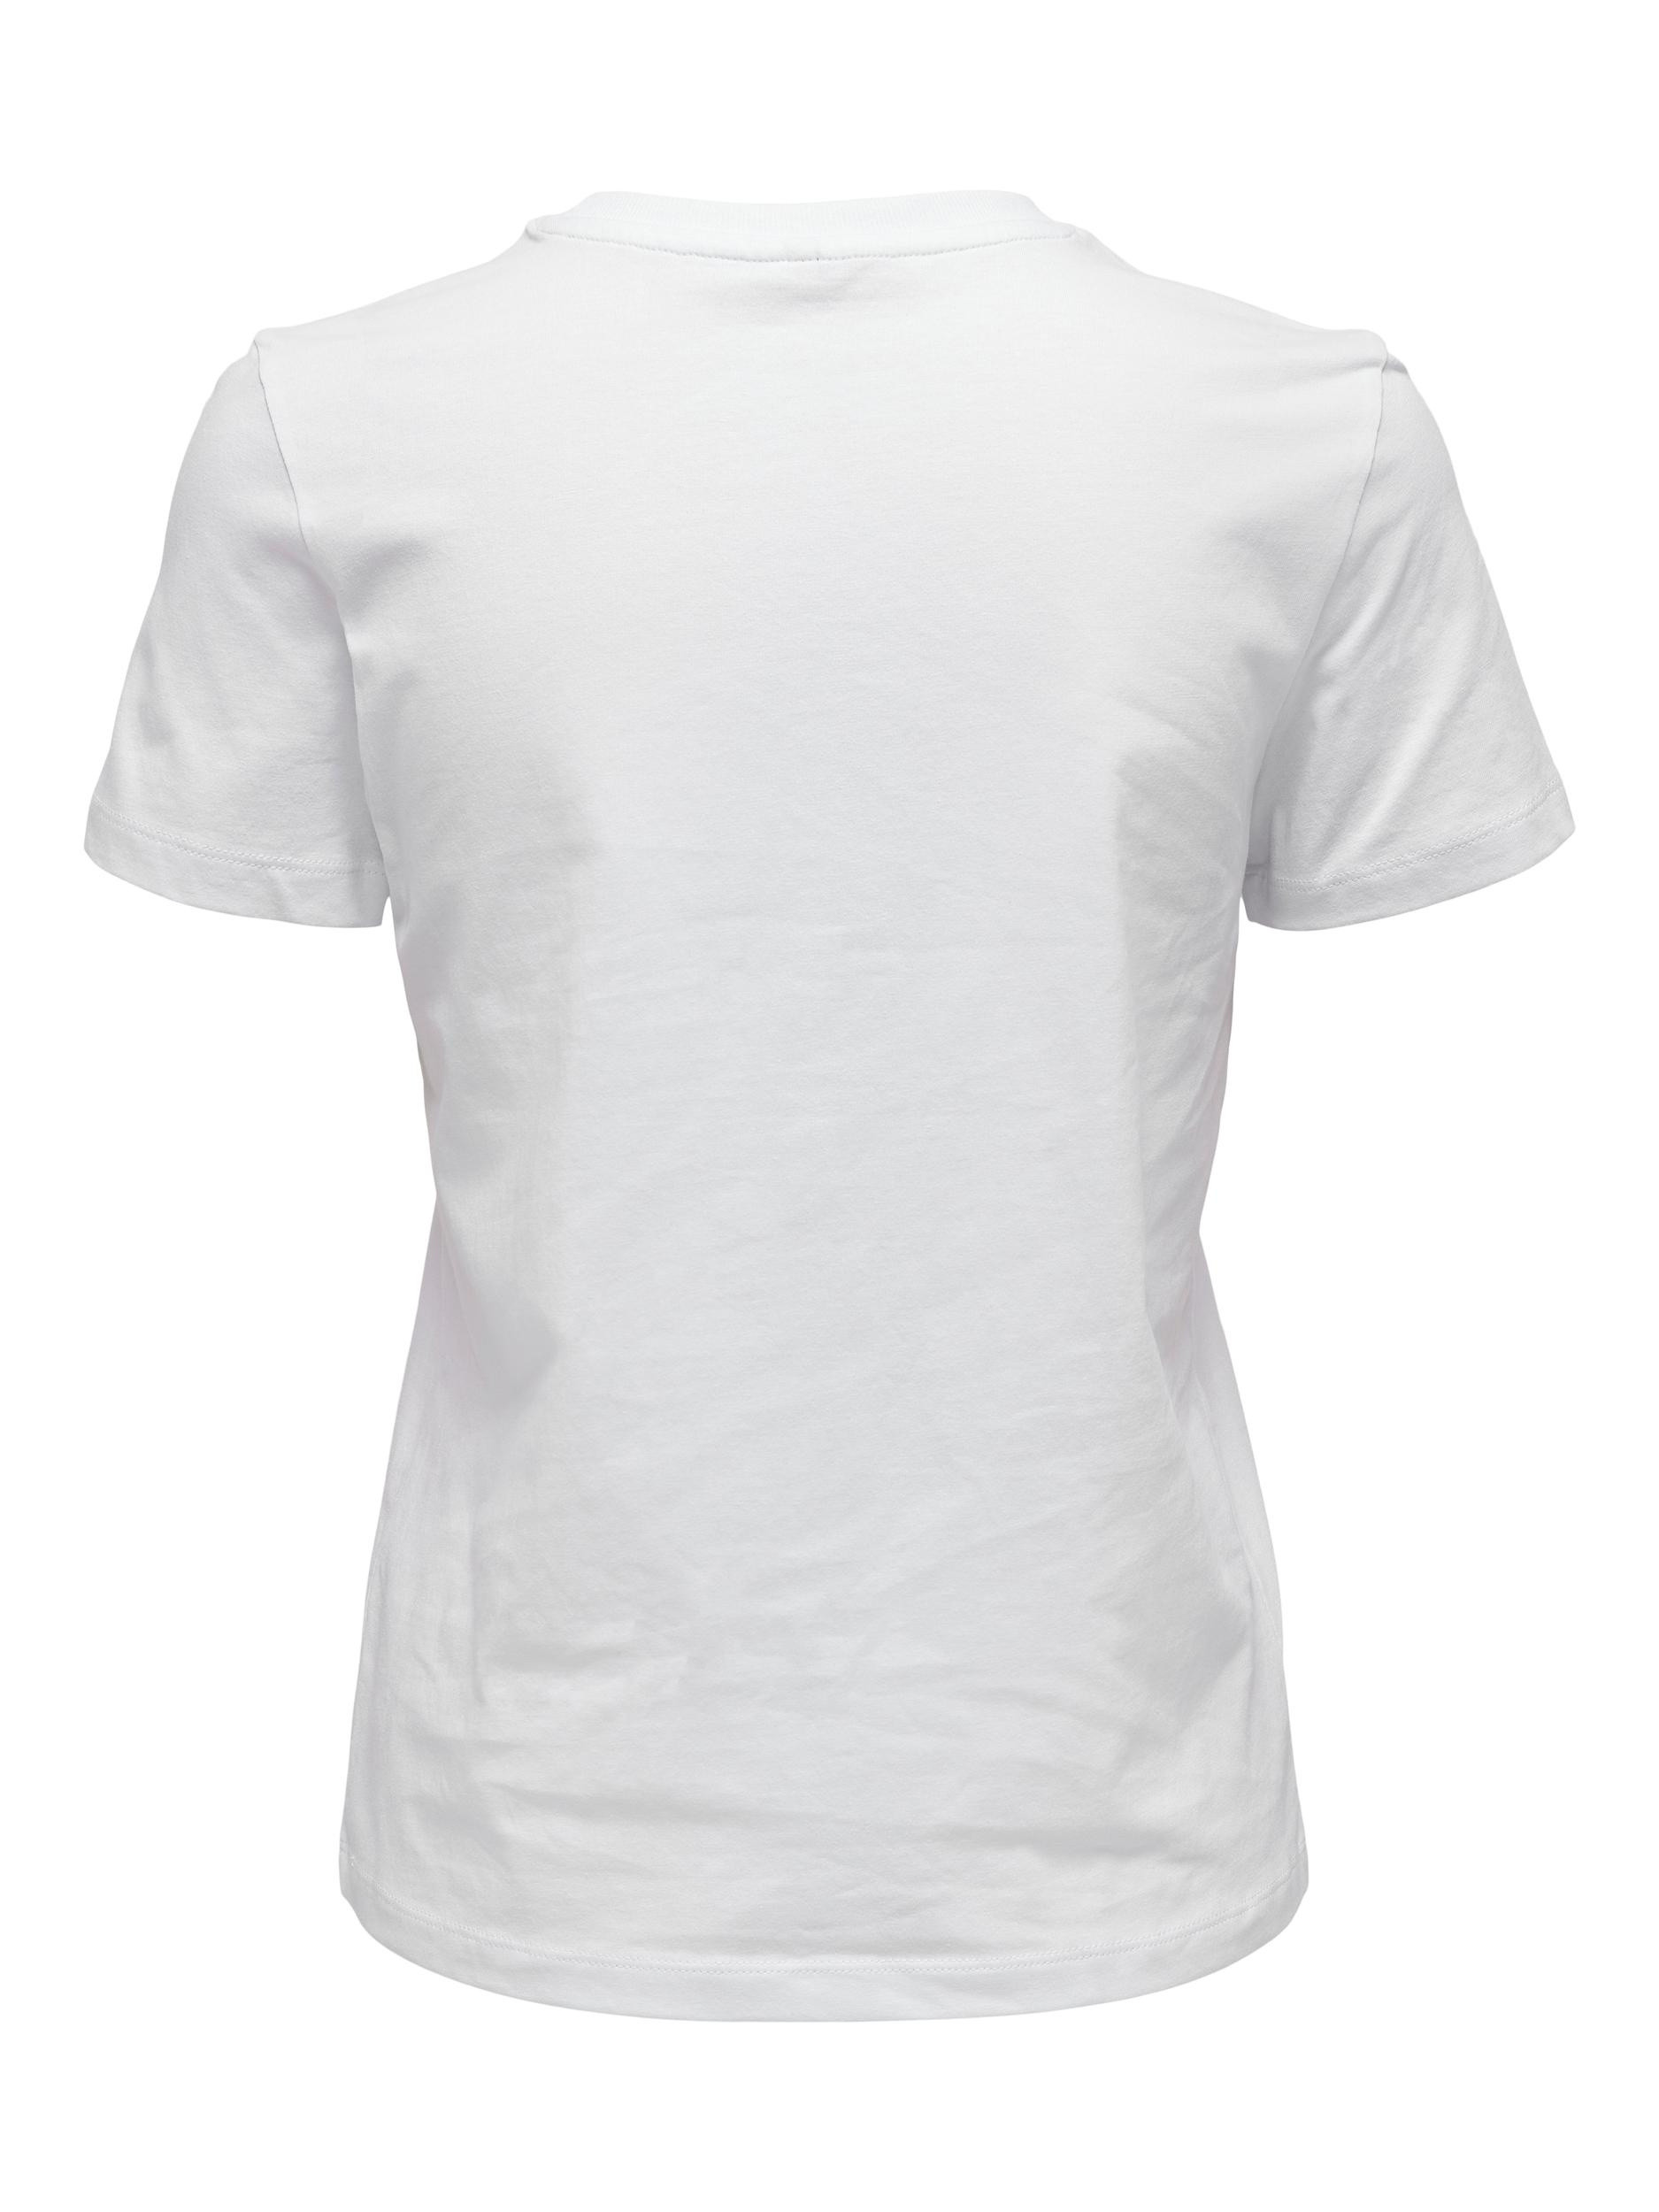 Only - T-shirt regular fit con stampa, Bianco, large image number 1